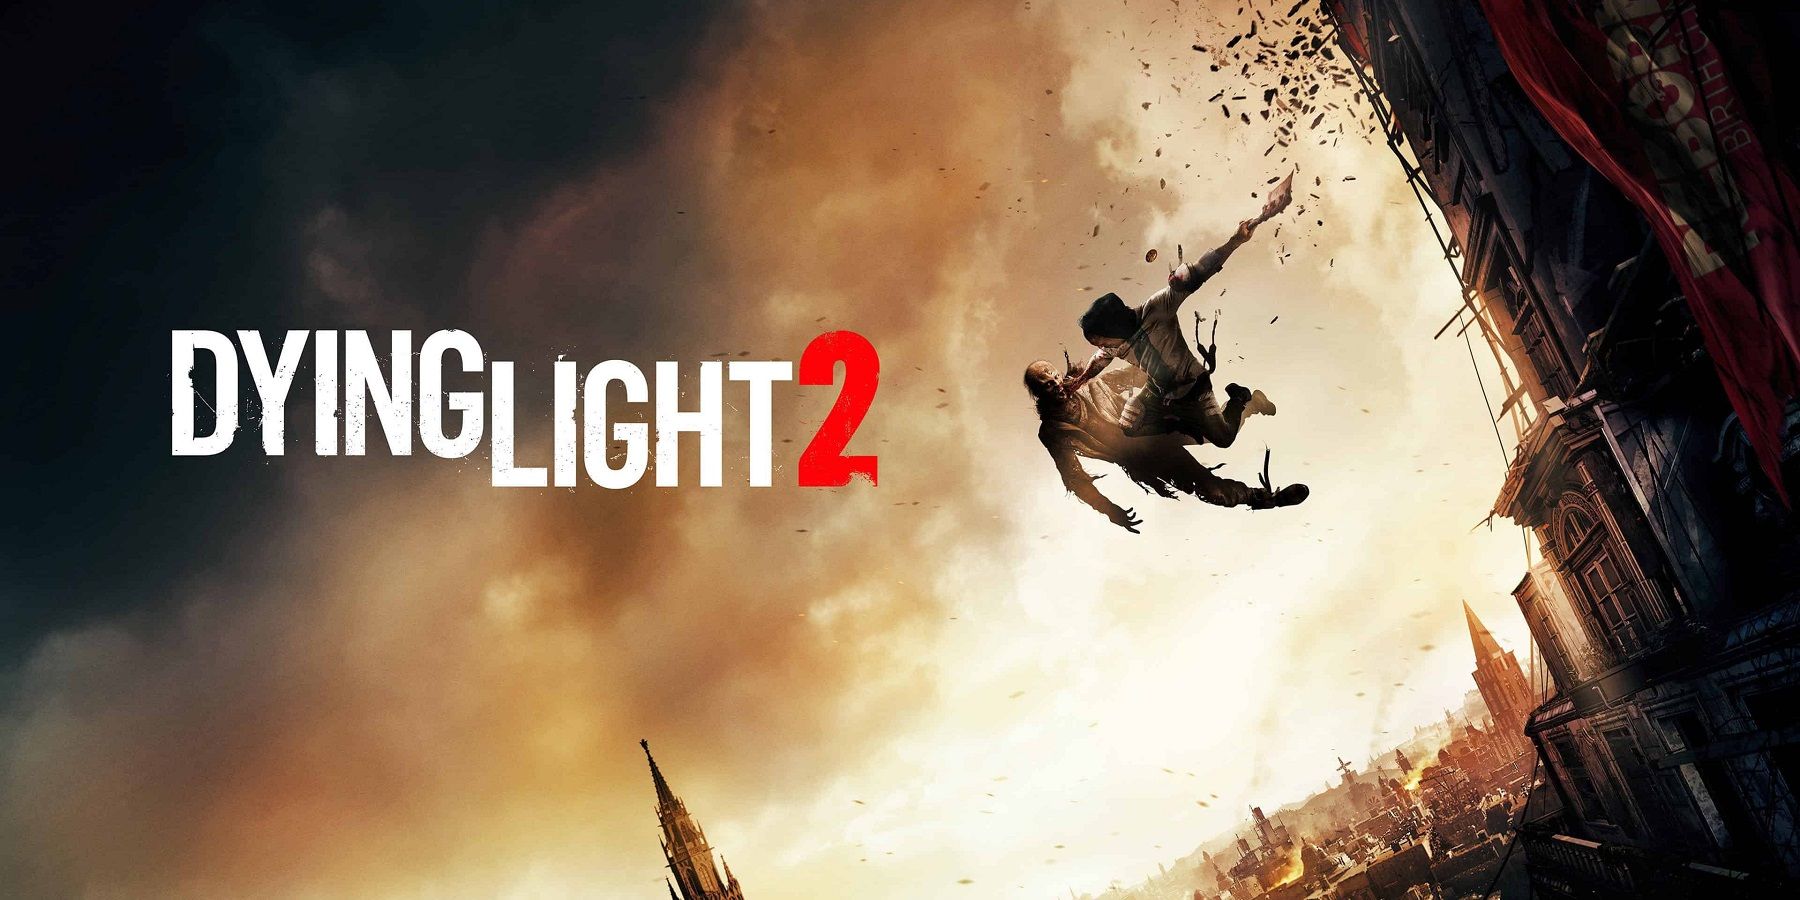 Dying Light 2: How To Play Co-Op With Friends - Cultured Vultures